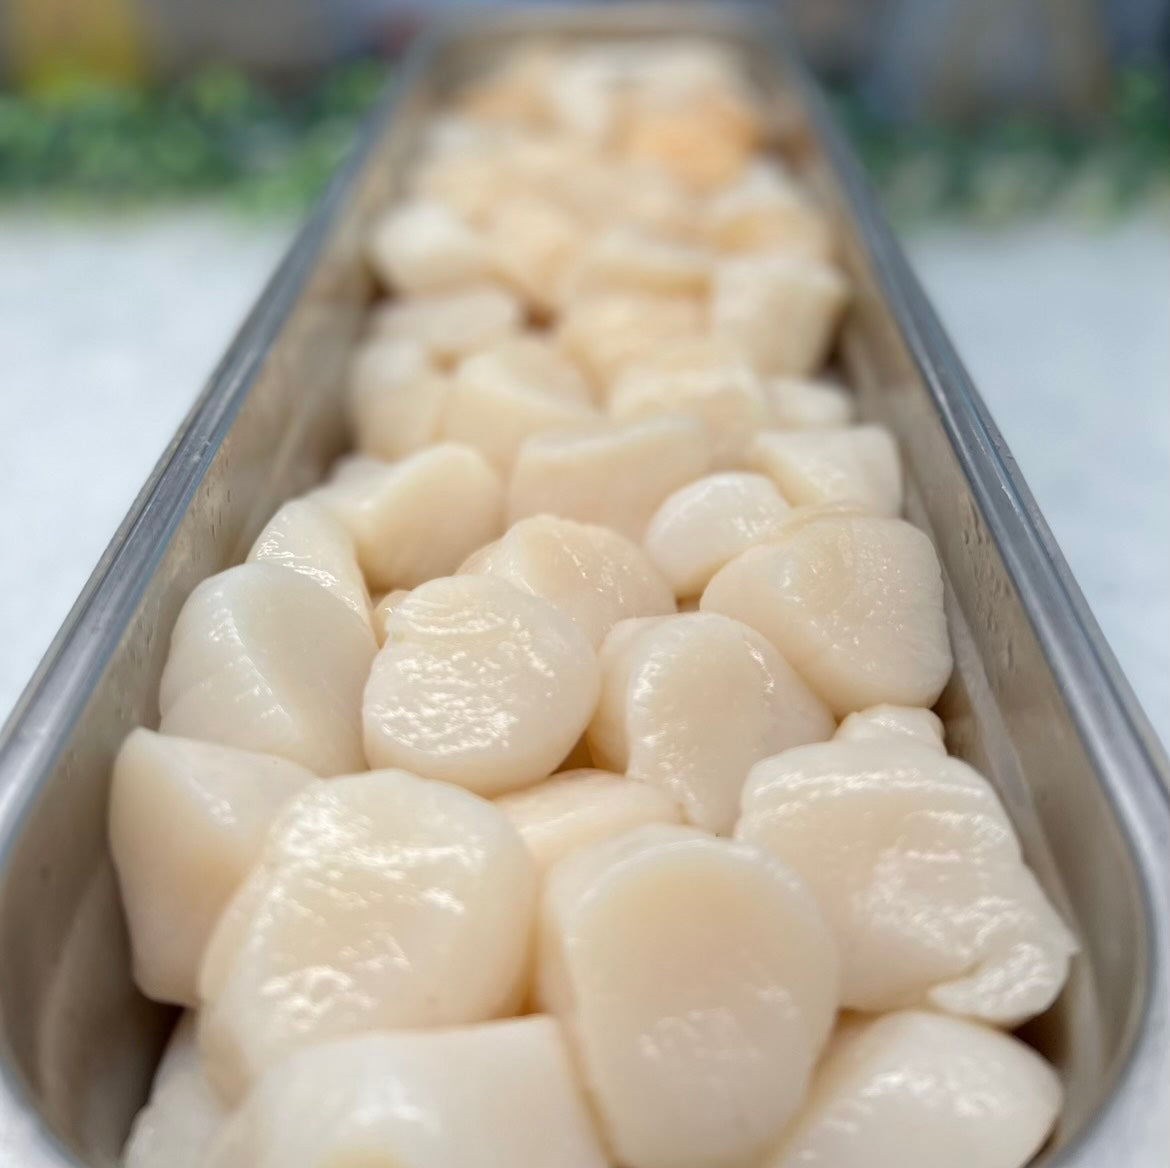 Scallop 101: How to Buy Fresh Scallops on Dry Land!